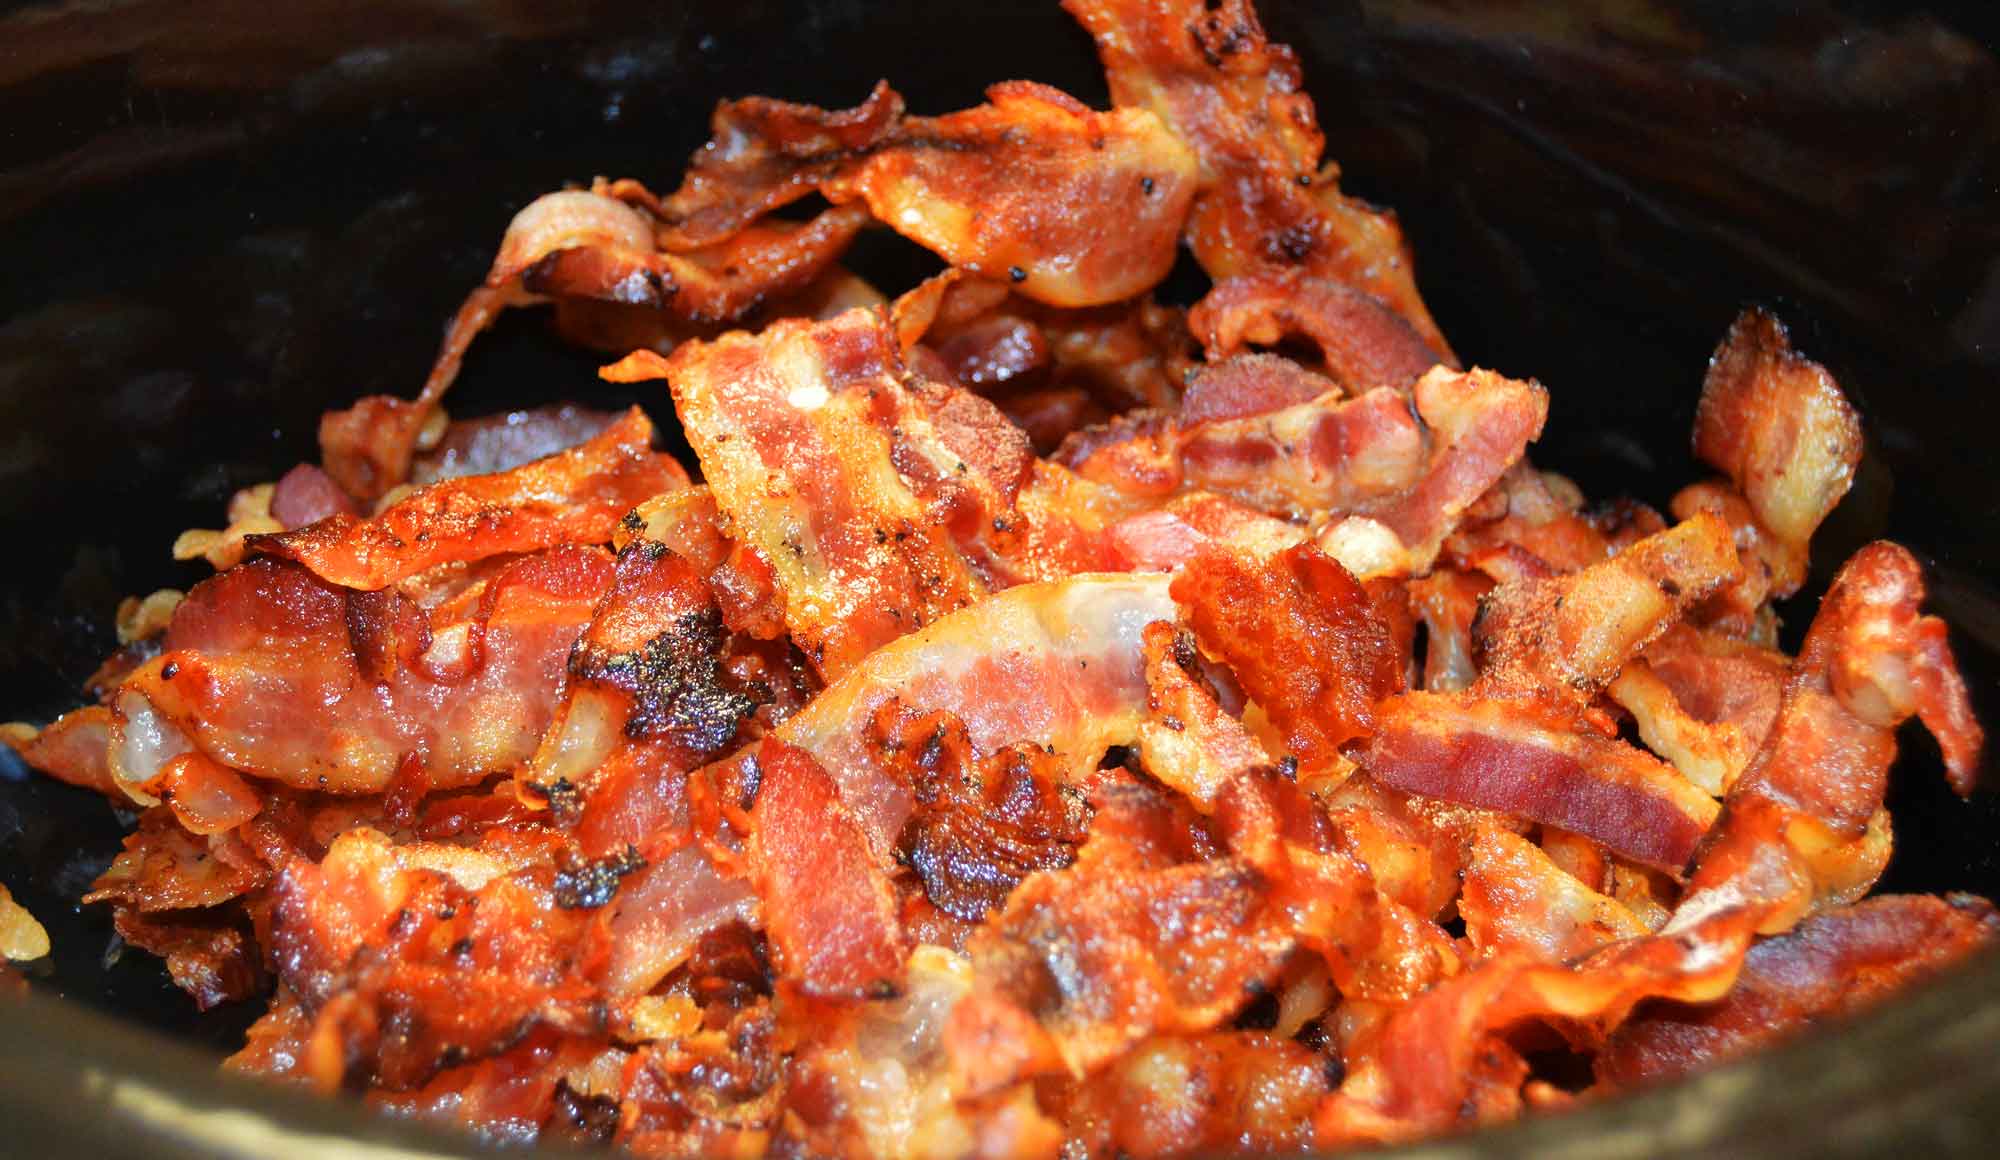 Is A Bacon Shortage Coming? Here's What You Need To Know.